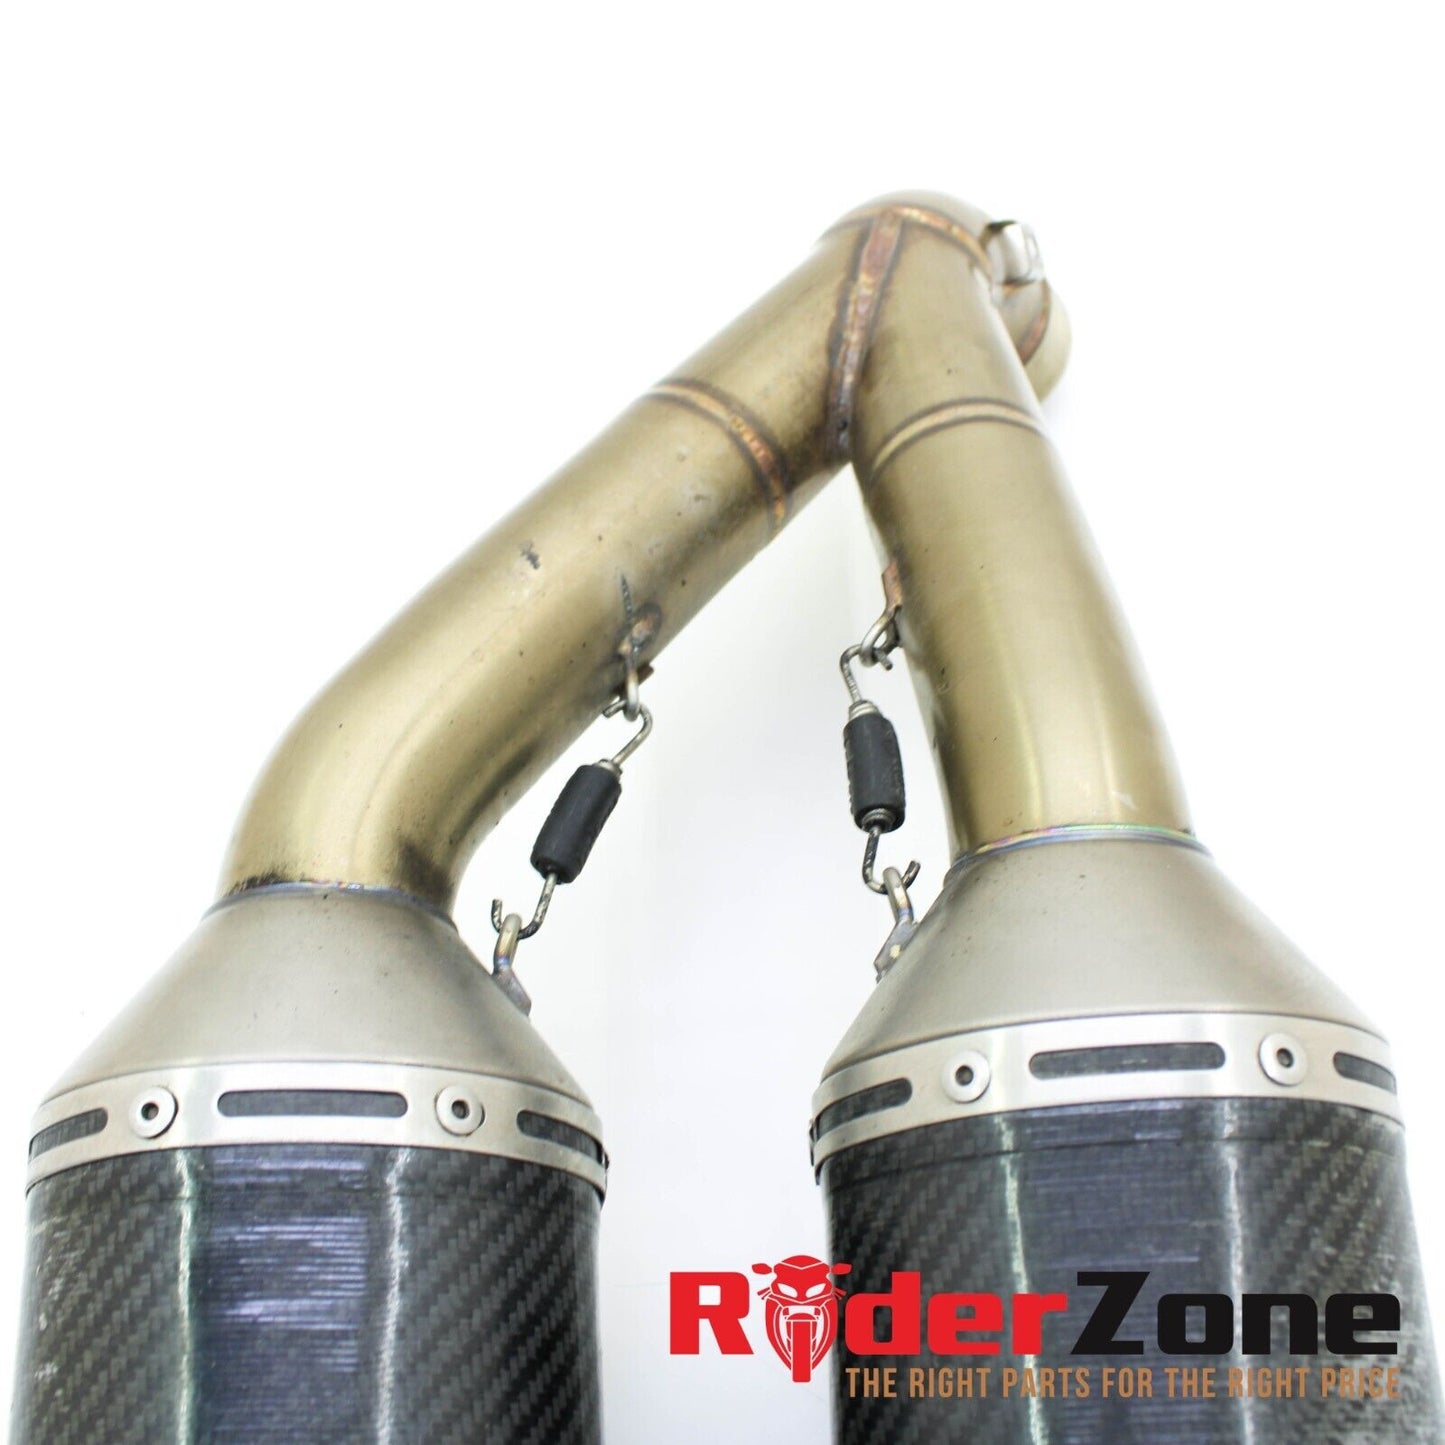 2008 - 2013 DUCATI 848 EVO LEOVINCE EXHAUST CARBON CANS MUFFLERS FULL SYSTEM